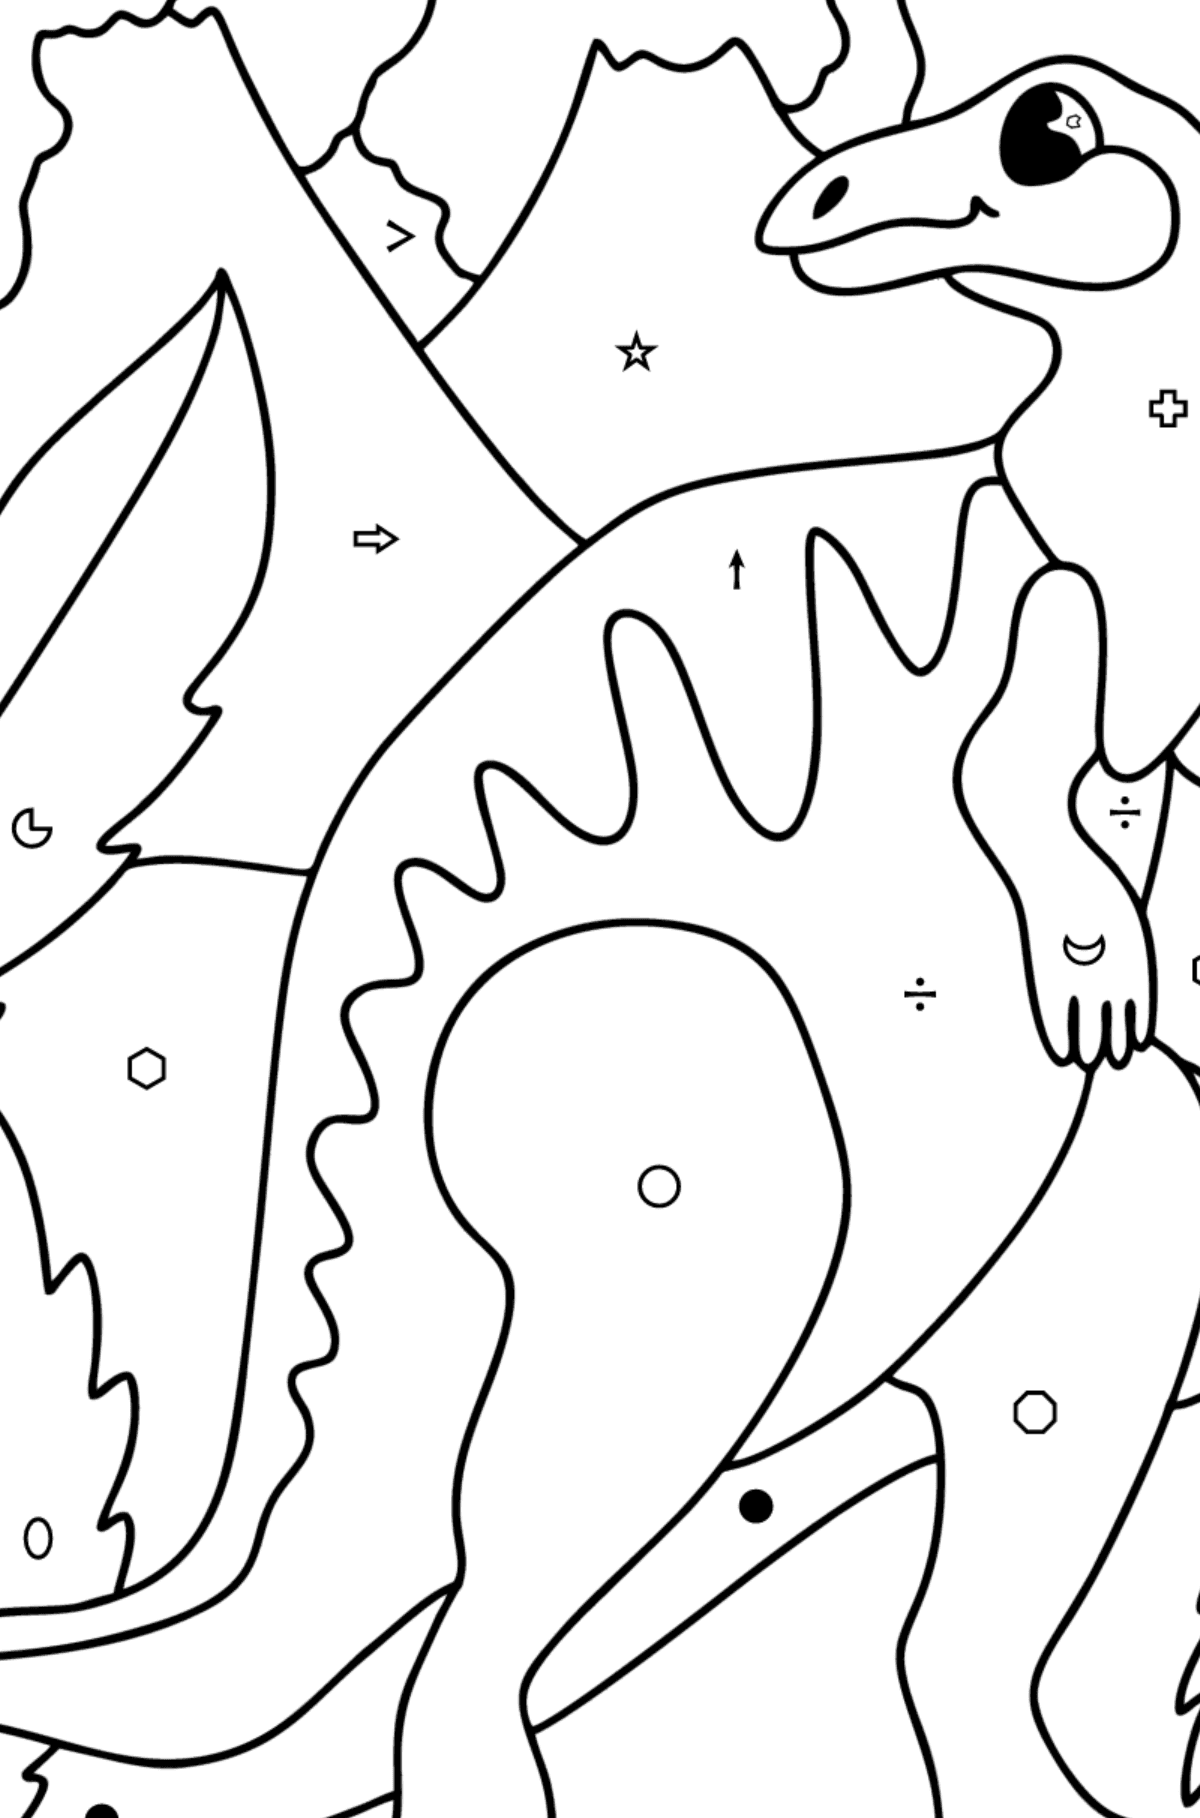 Hadrosaur coloring page - Coloring by Symbols and Geometric Shapes for Kids